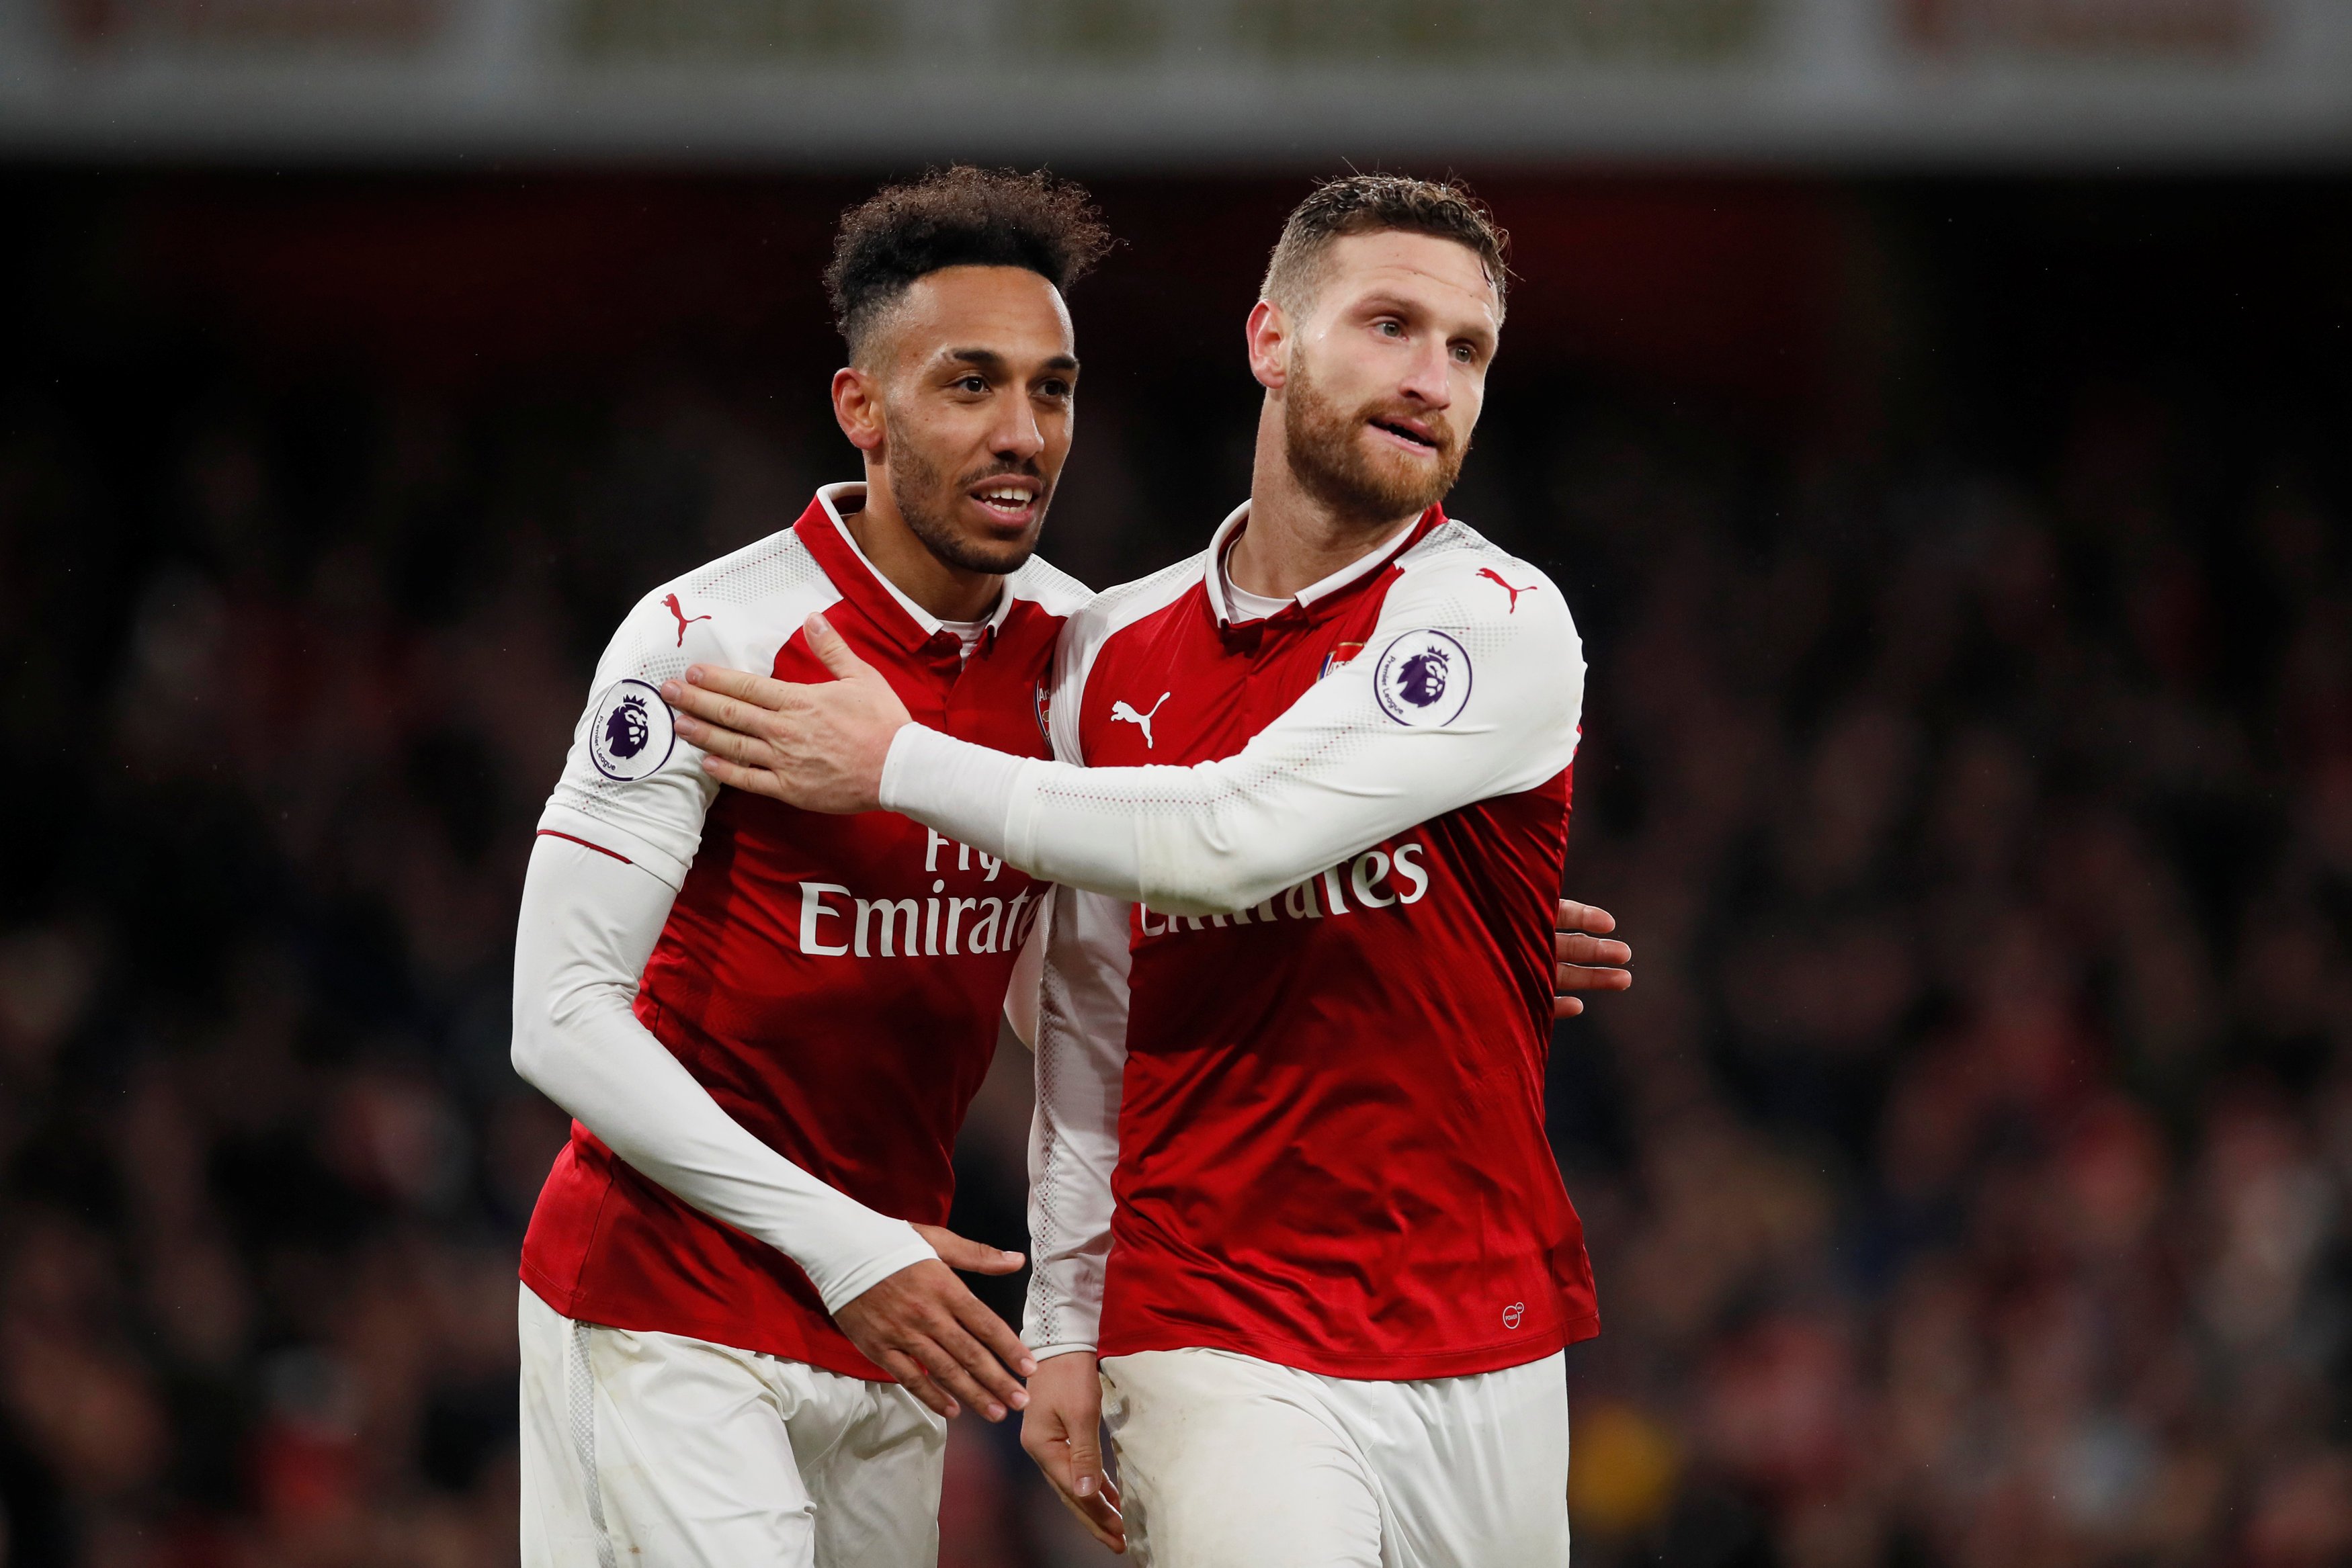 Arsenal 5-1 Everton: Three talking points from the Emirates